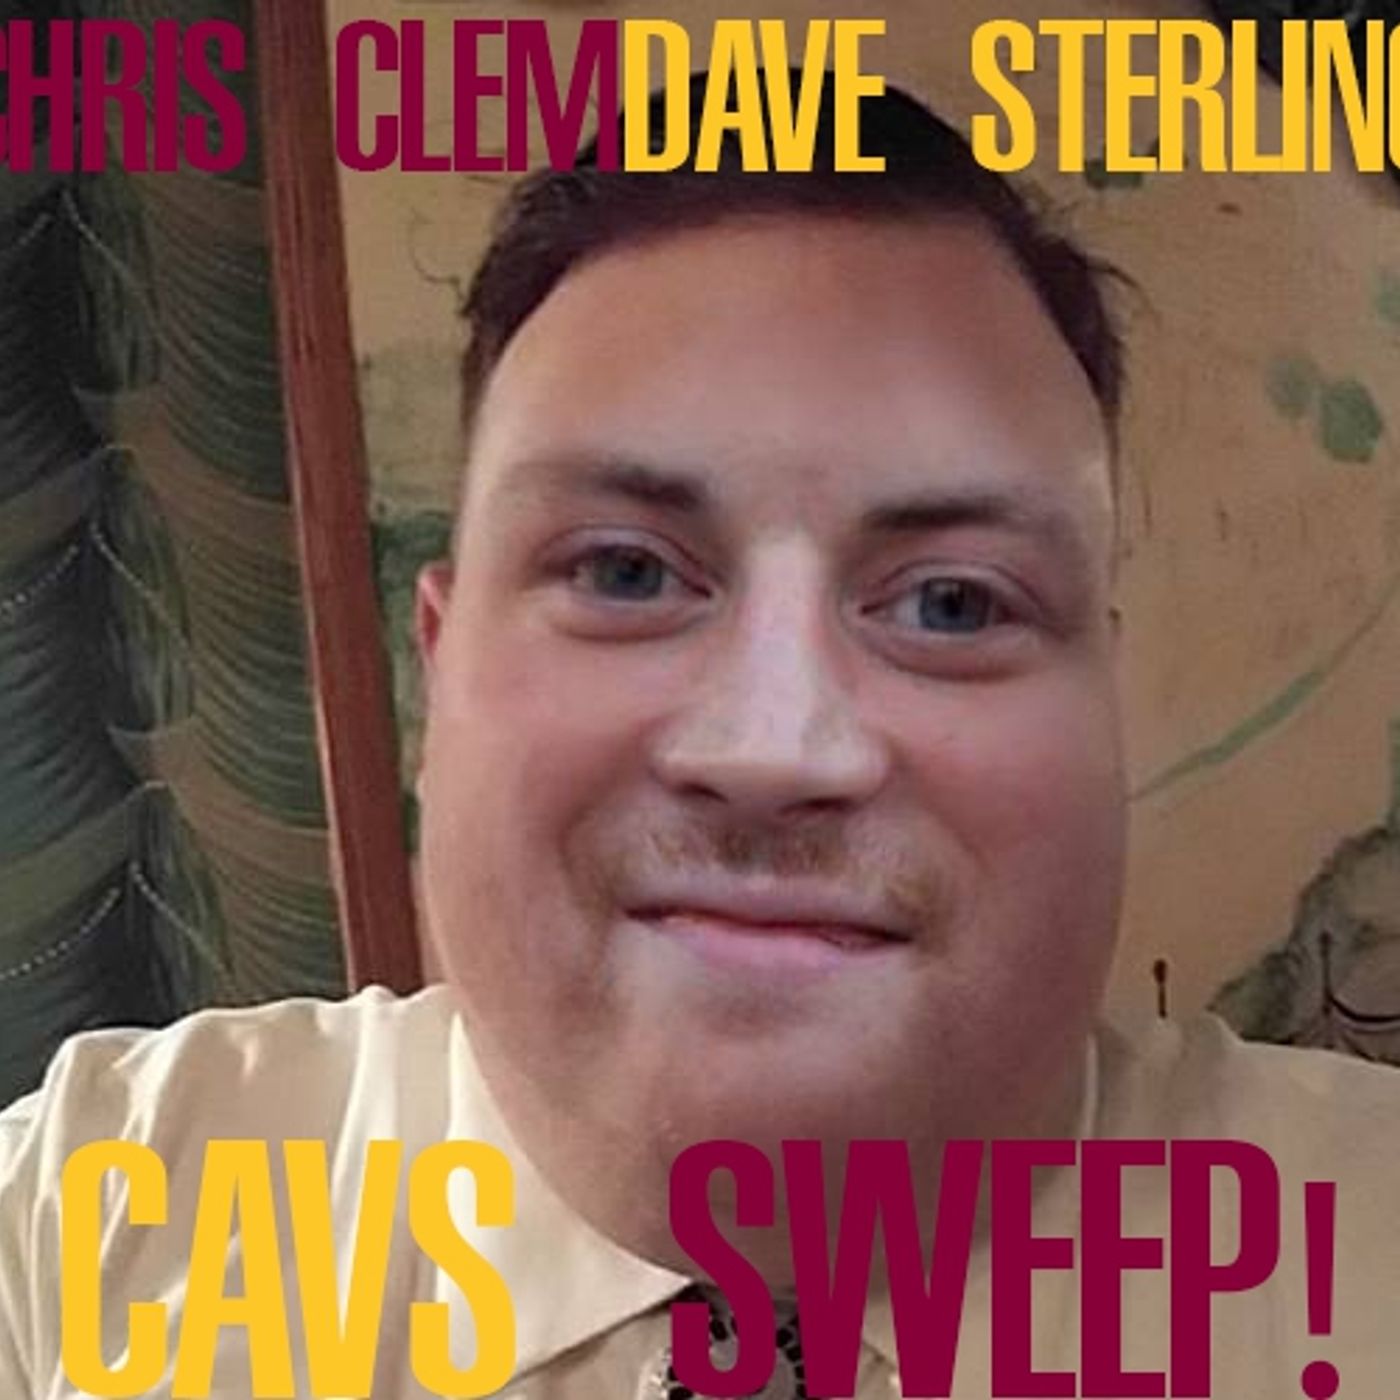 S1 Ep31: Chris Clem’s Cavs Cast #62 – Cavs/Pistons Game 4 w/ Dave Sterling